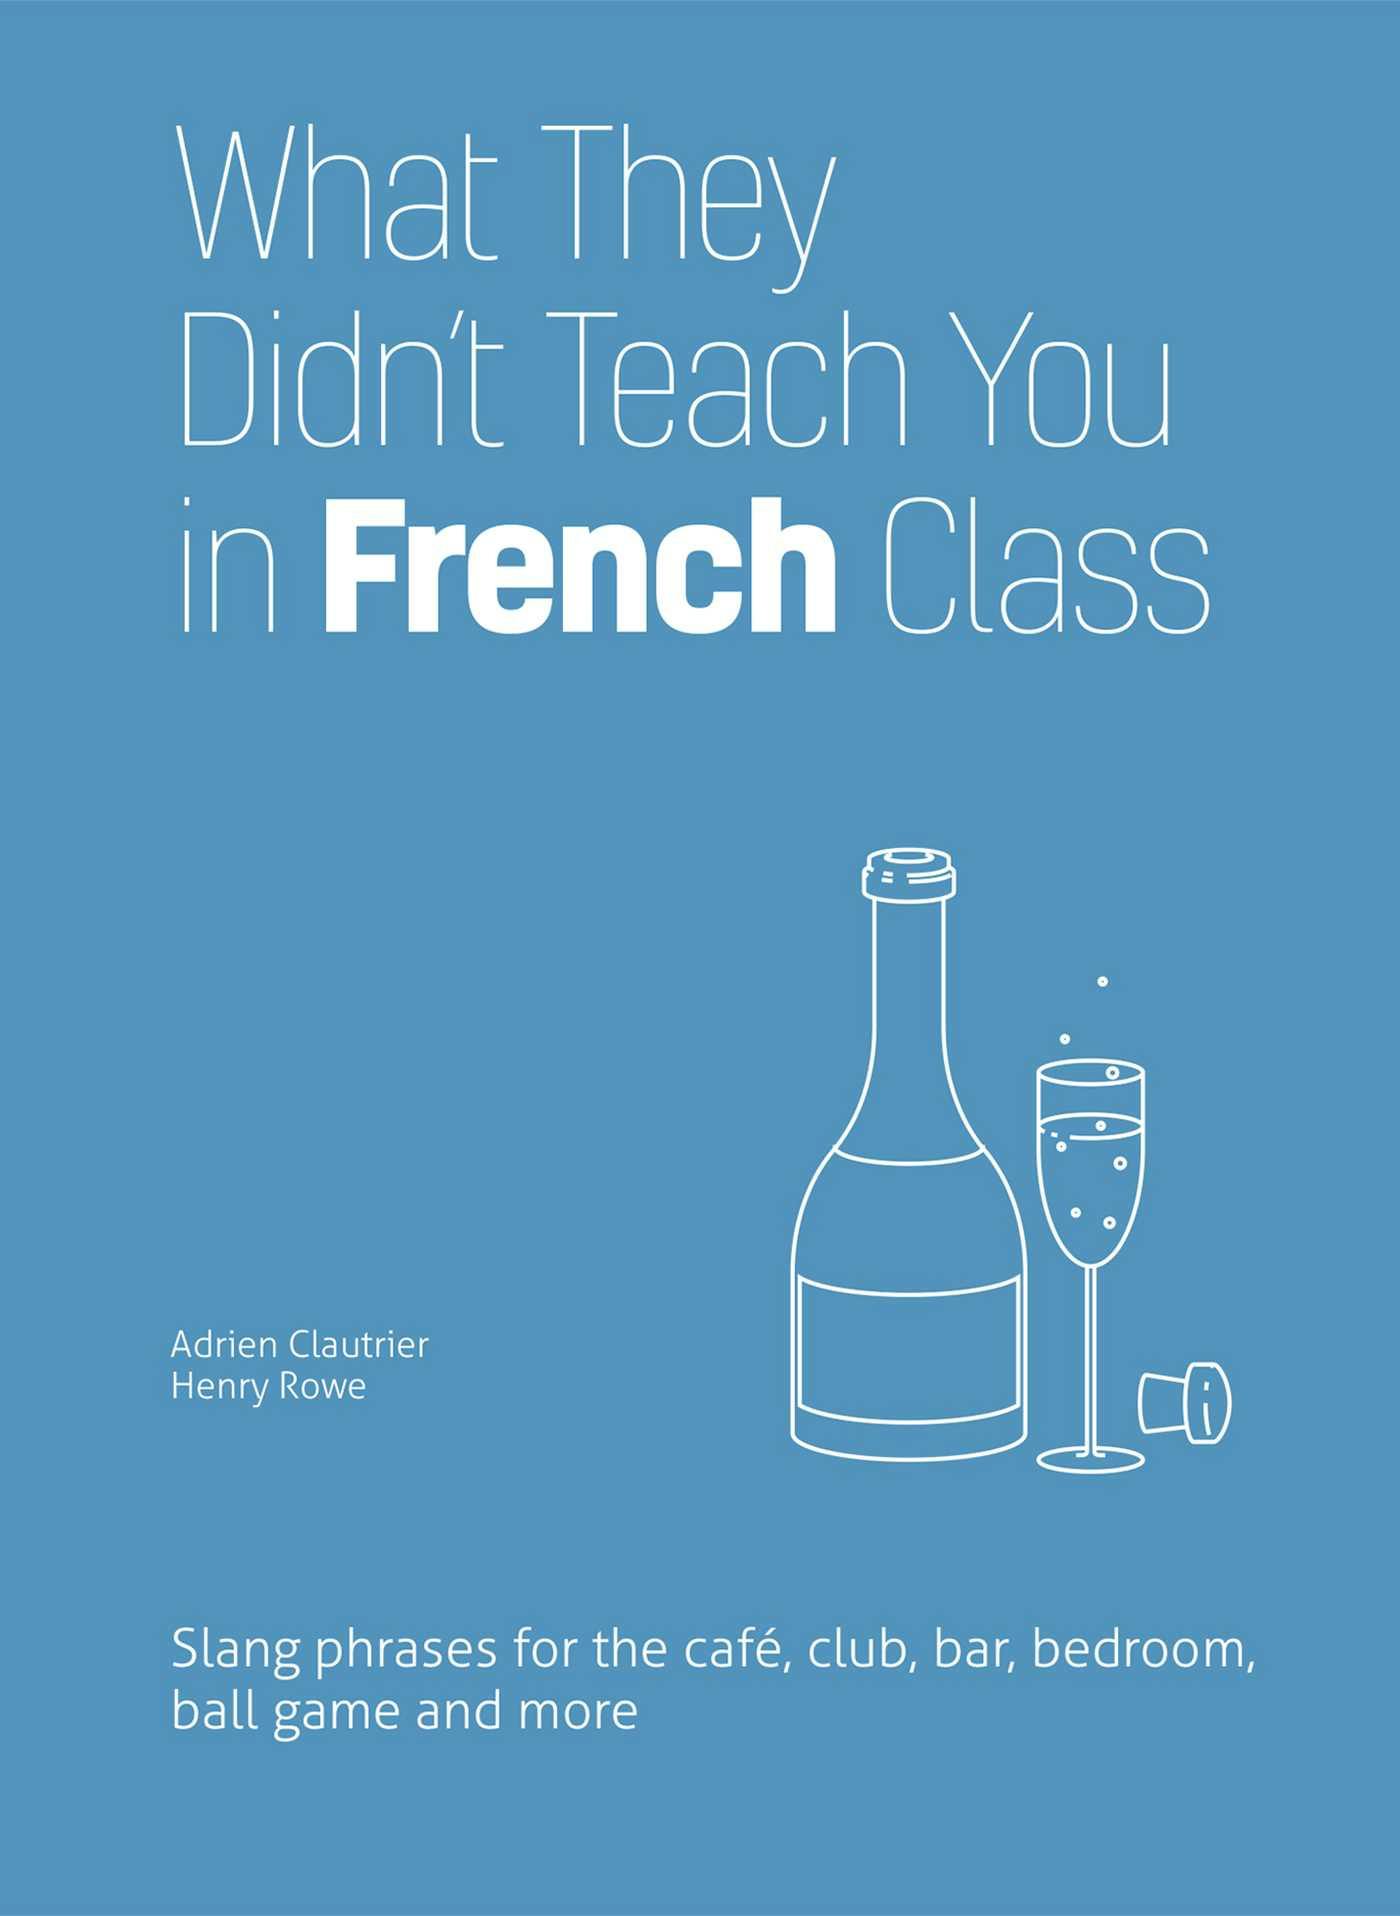 What They Didn't Teach You in French Class: Slang Phrases for the Cafe, Club, Bar, Bedroom, Ball Game and More - Henry Rowe, Adrien Clautrier